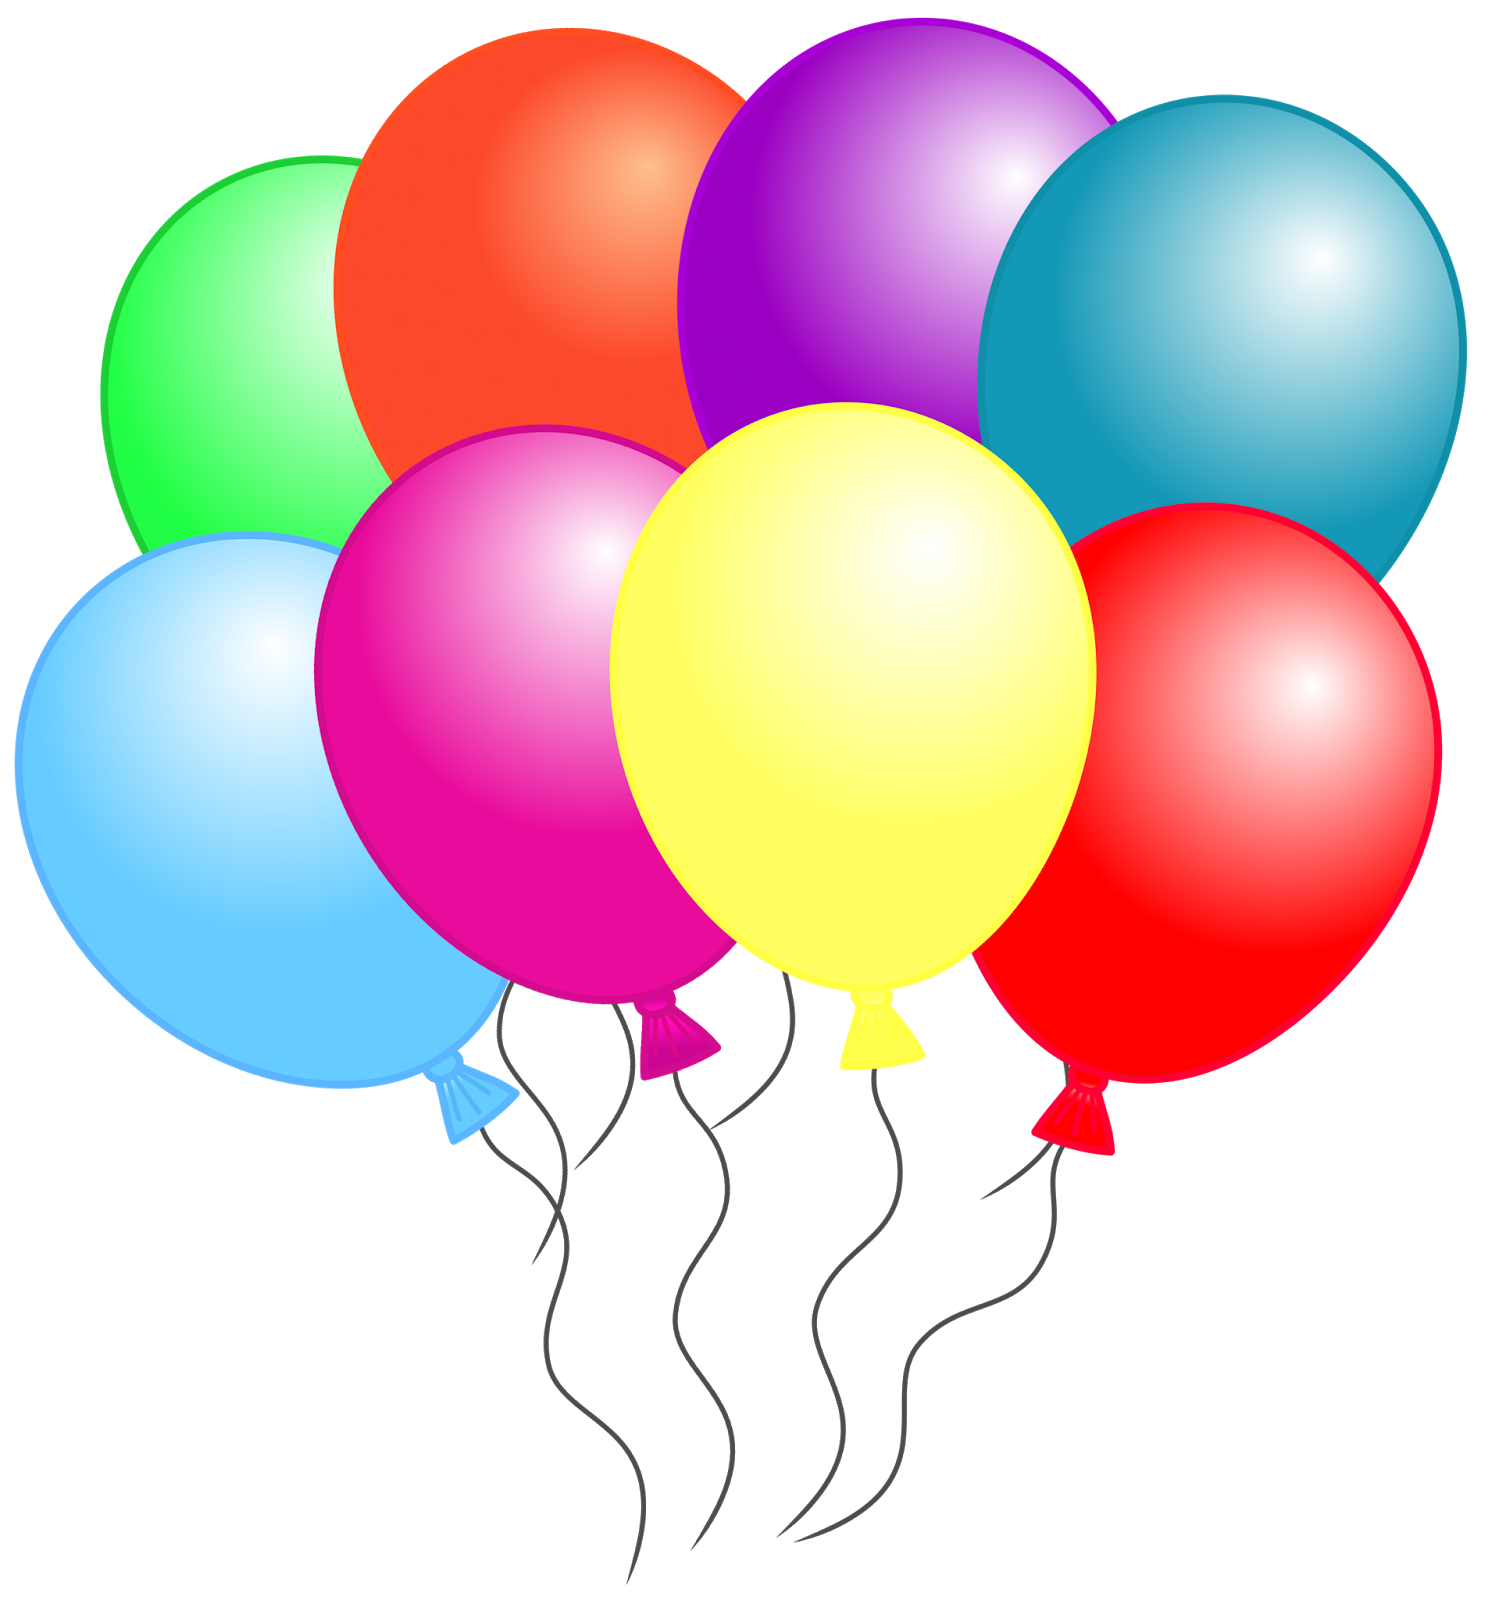 Balloon clipart that can be downloaded individually and used alone